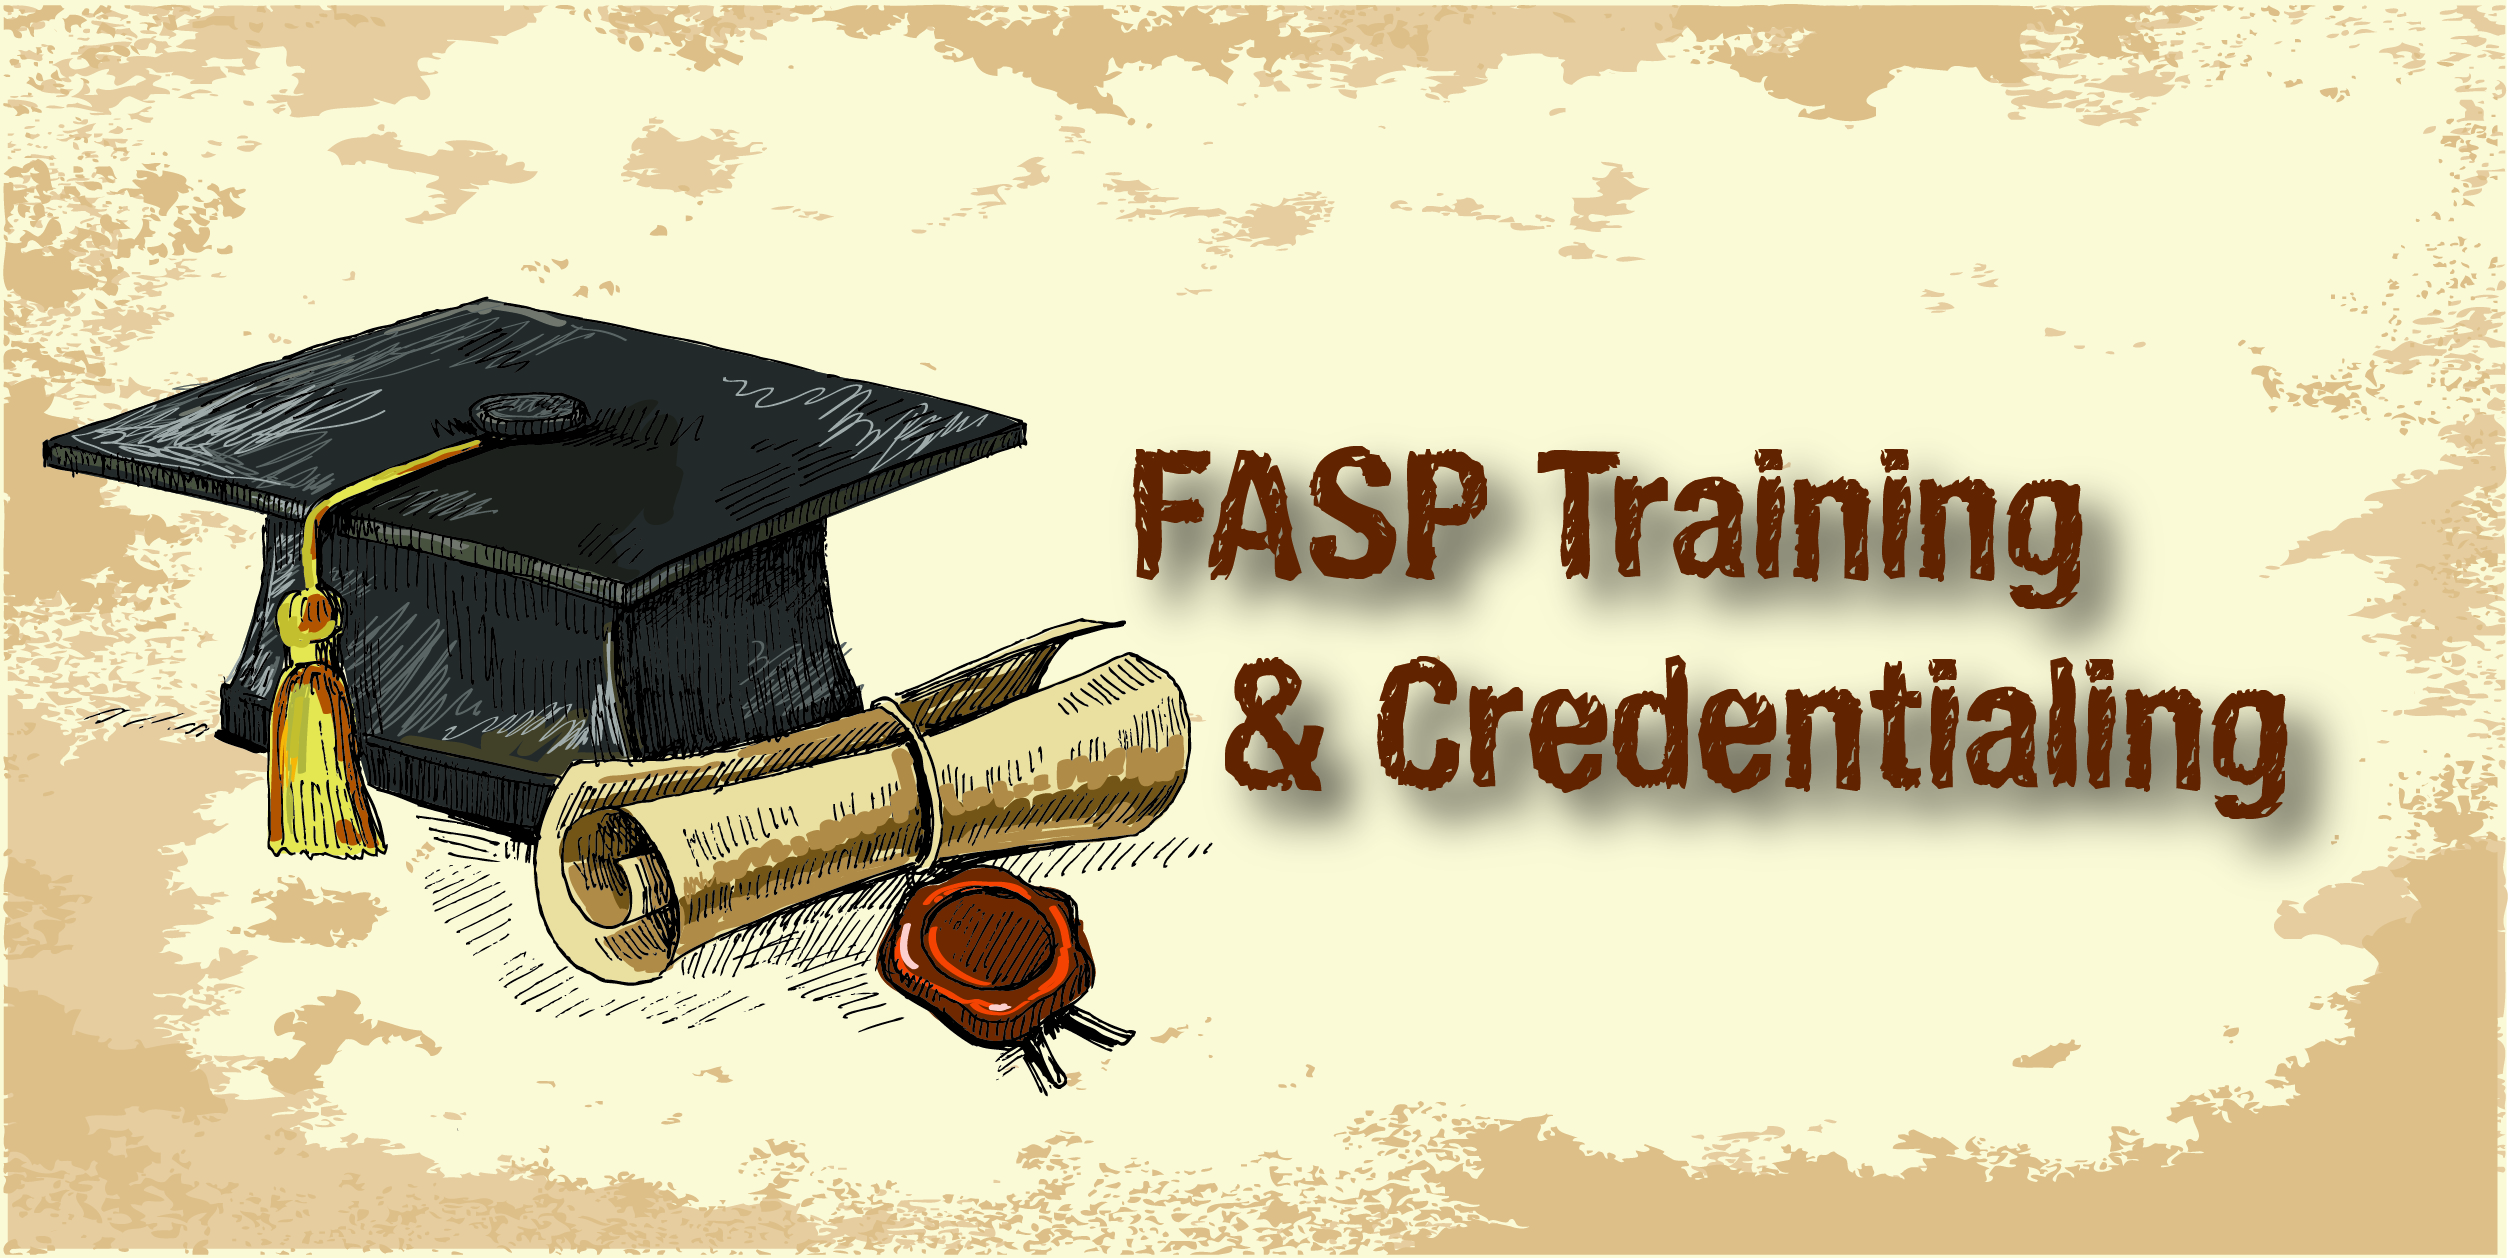 FASP's Training & Credentialing